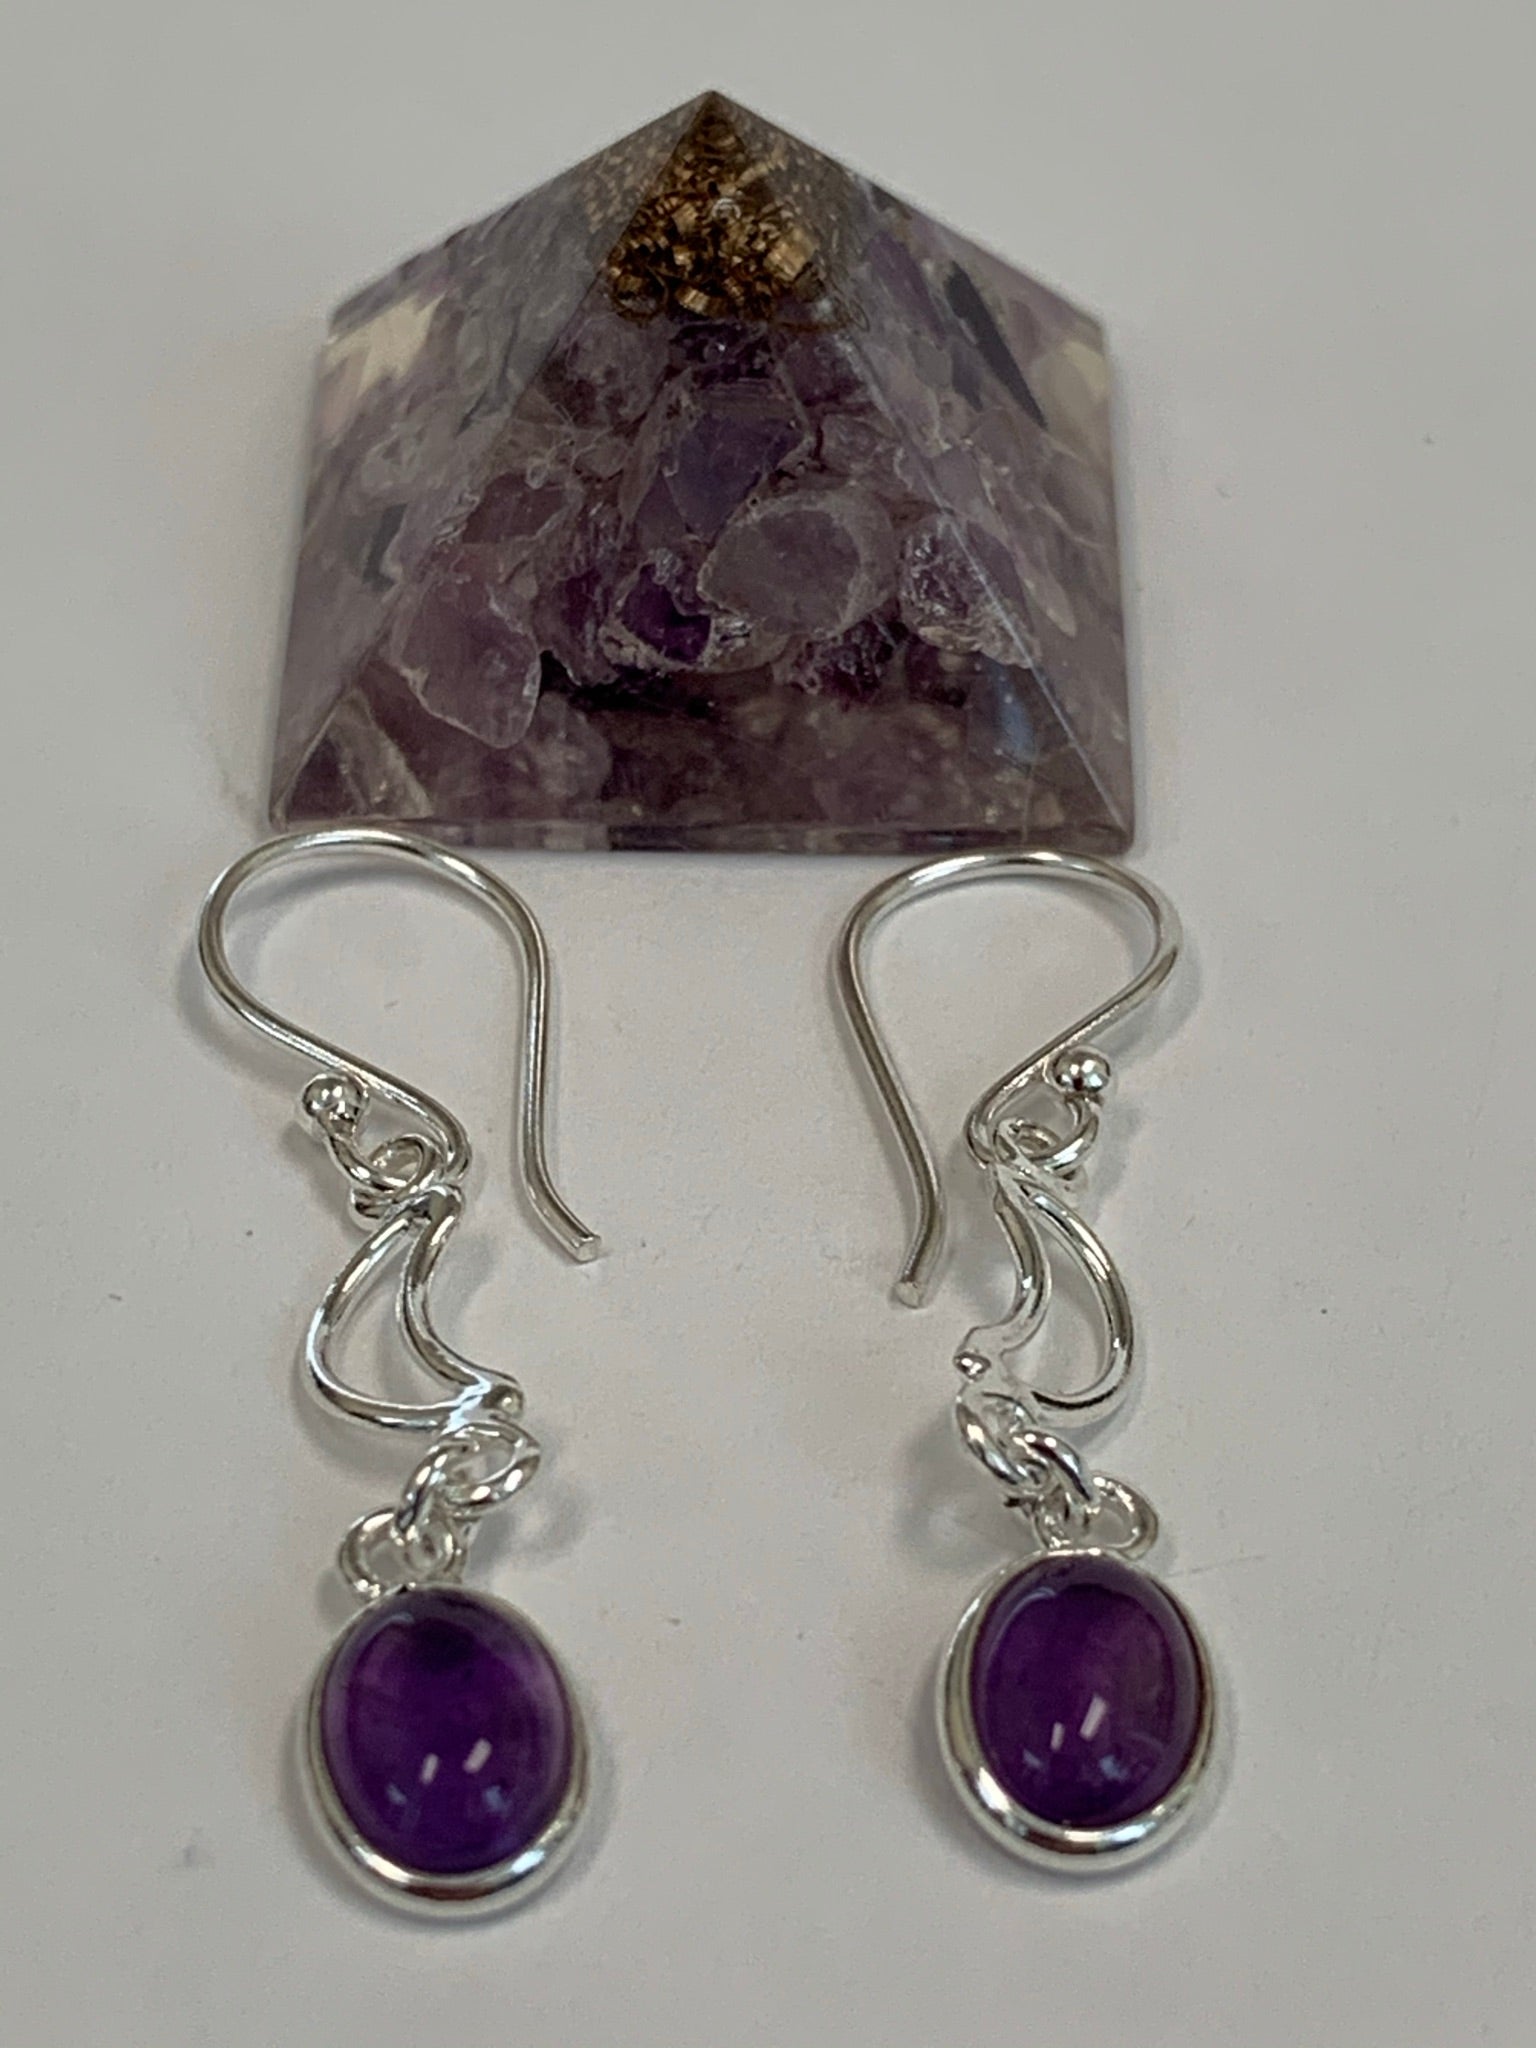 Close-up View. Little round amethyst gemstones (cabs, not faceted) dangle below two small open crescent moons. These earrings are lightweight, have wires, not posts and are approximately 1½" long.